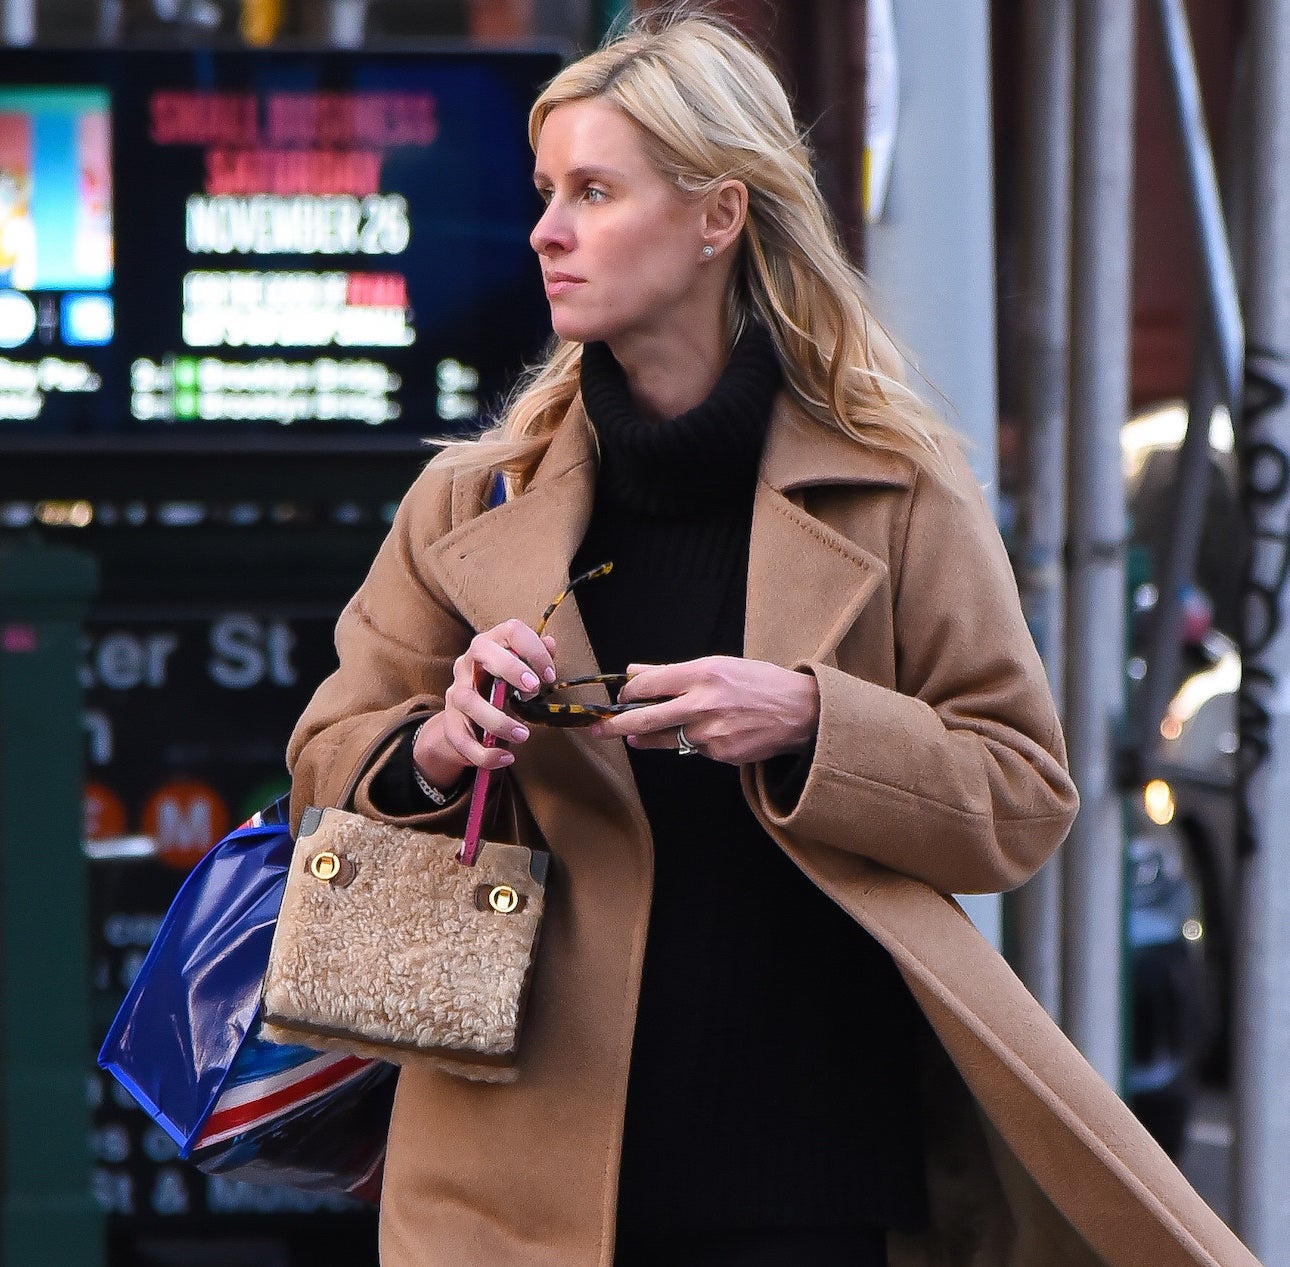 Nicky Hilton seen out and about in Manhattan on November 22, 2022 in New York City